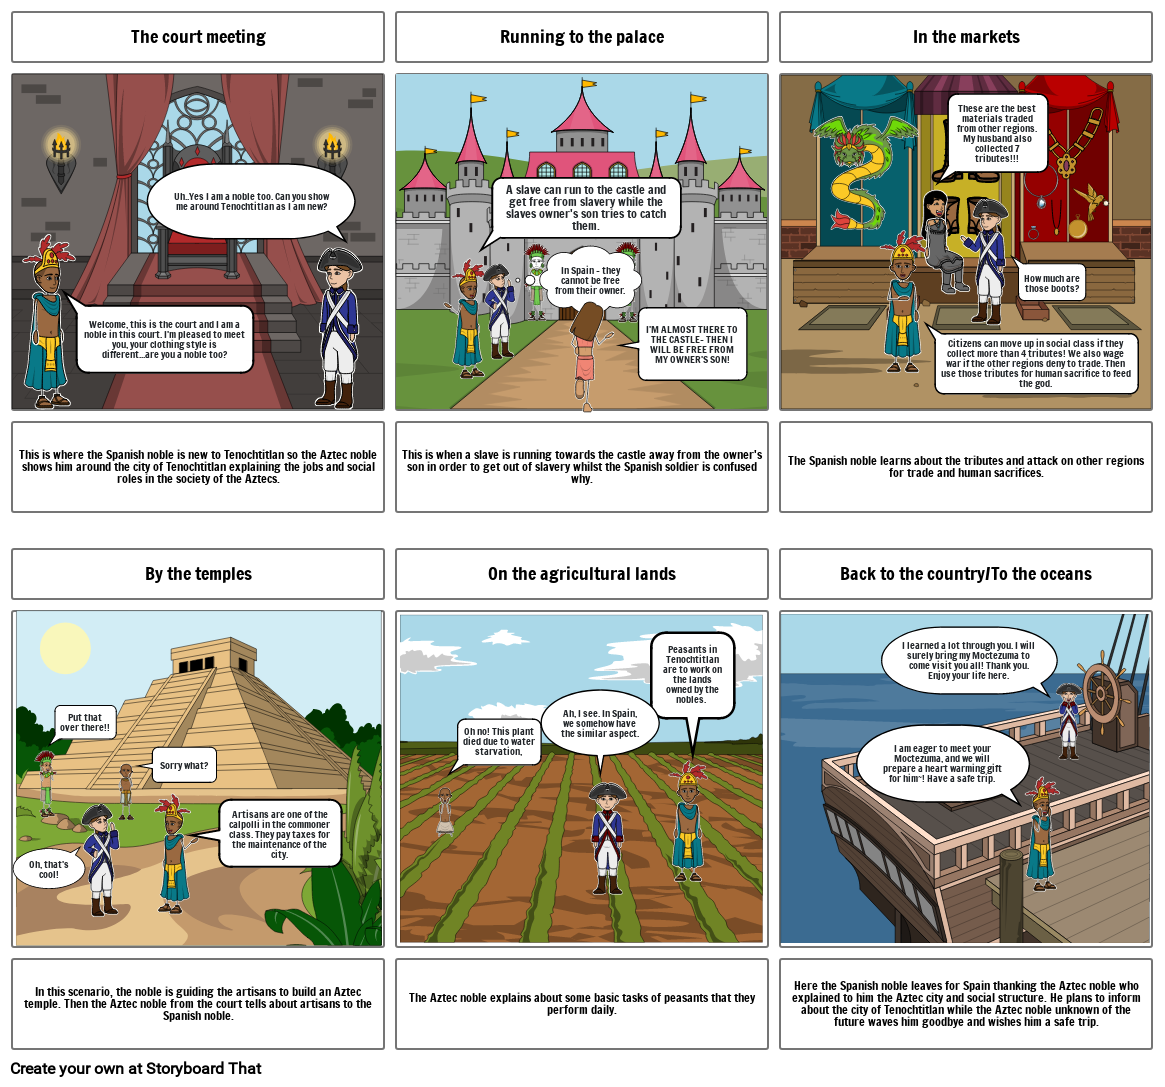 Storyboard - Spanish and Aztec meeting